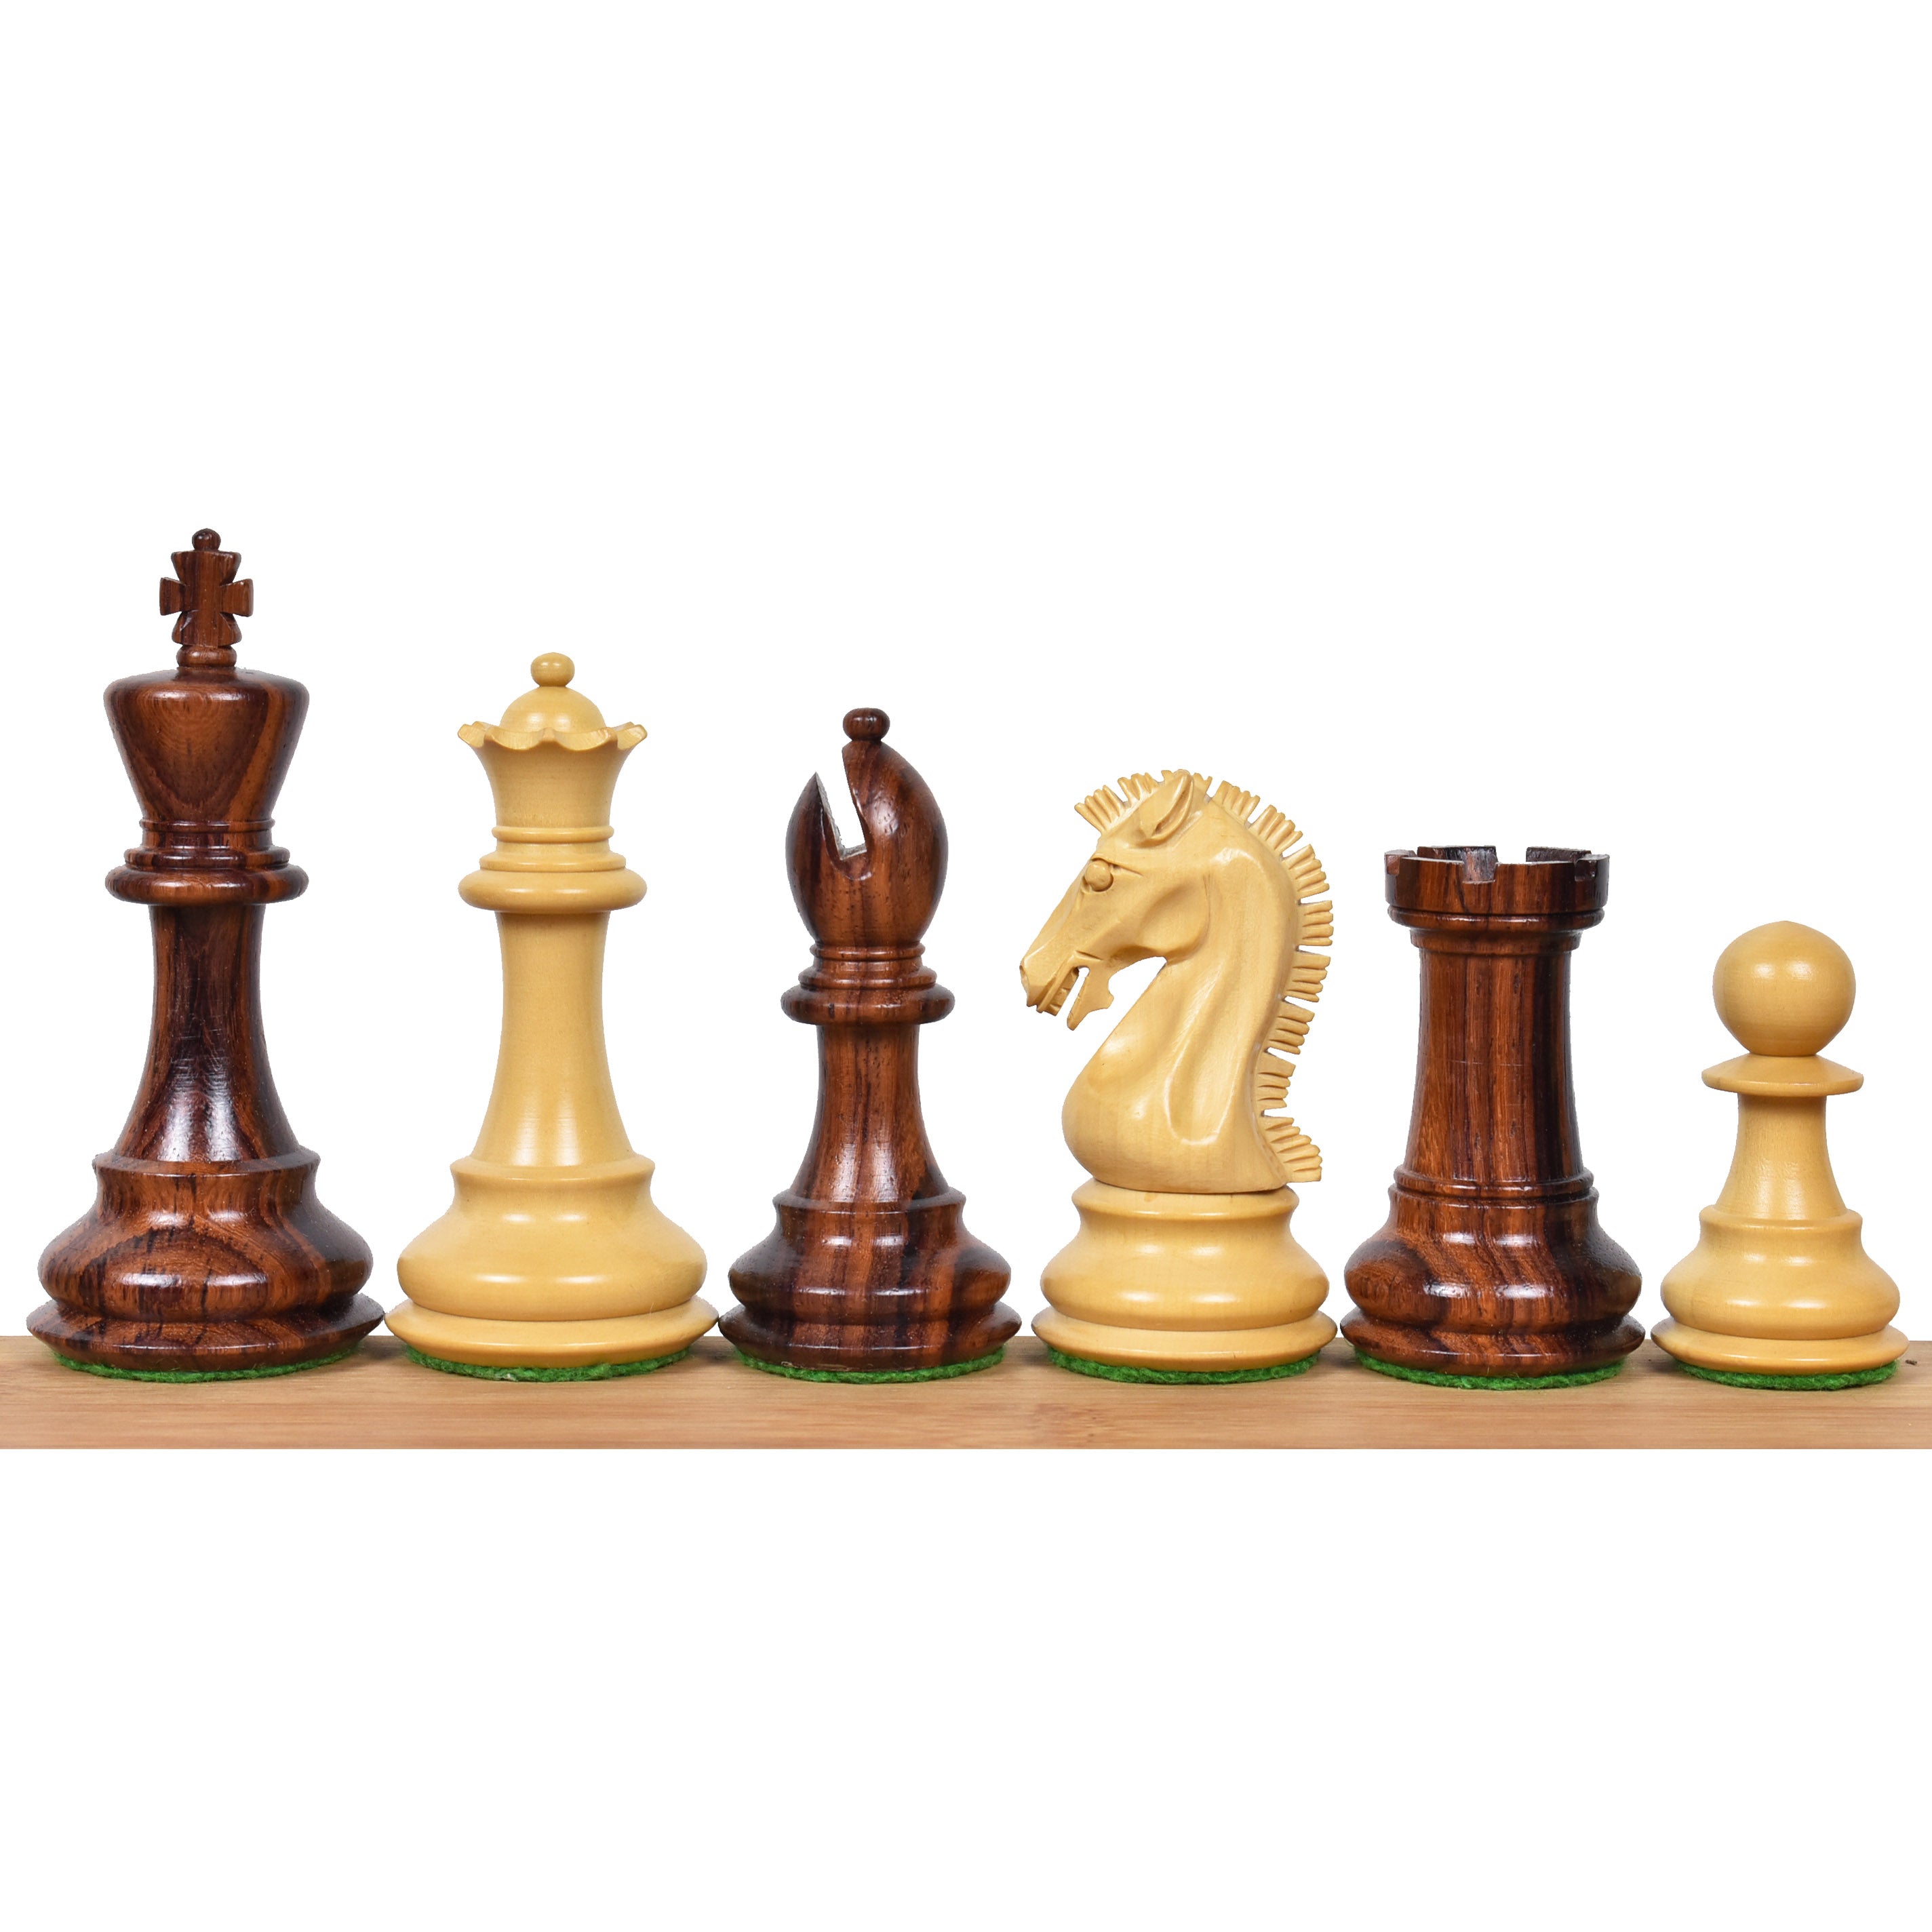 3.9" Craftsman Series Staunton Chess Set Combo - Pieces in Rosewood With 21" Chess board and Leatherette Coffer Storage Box